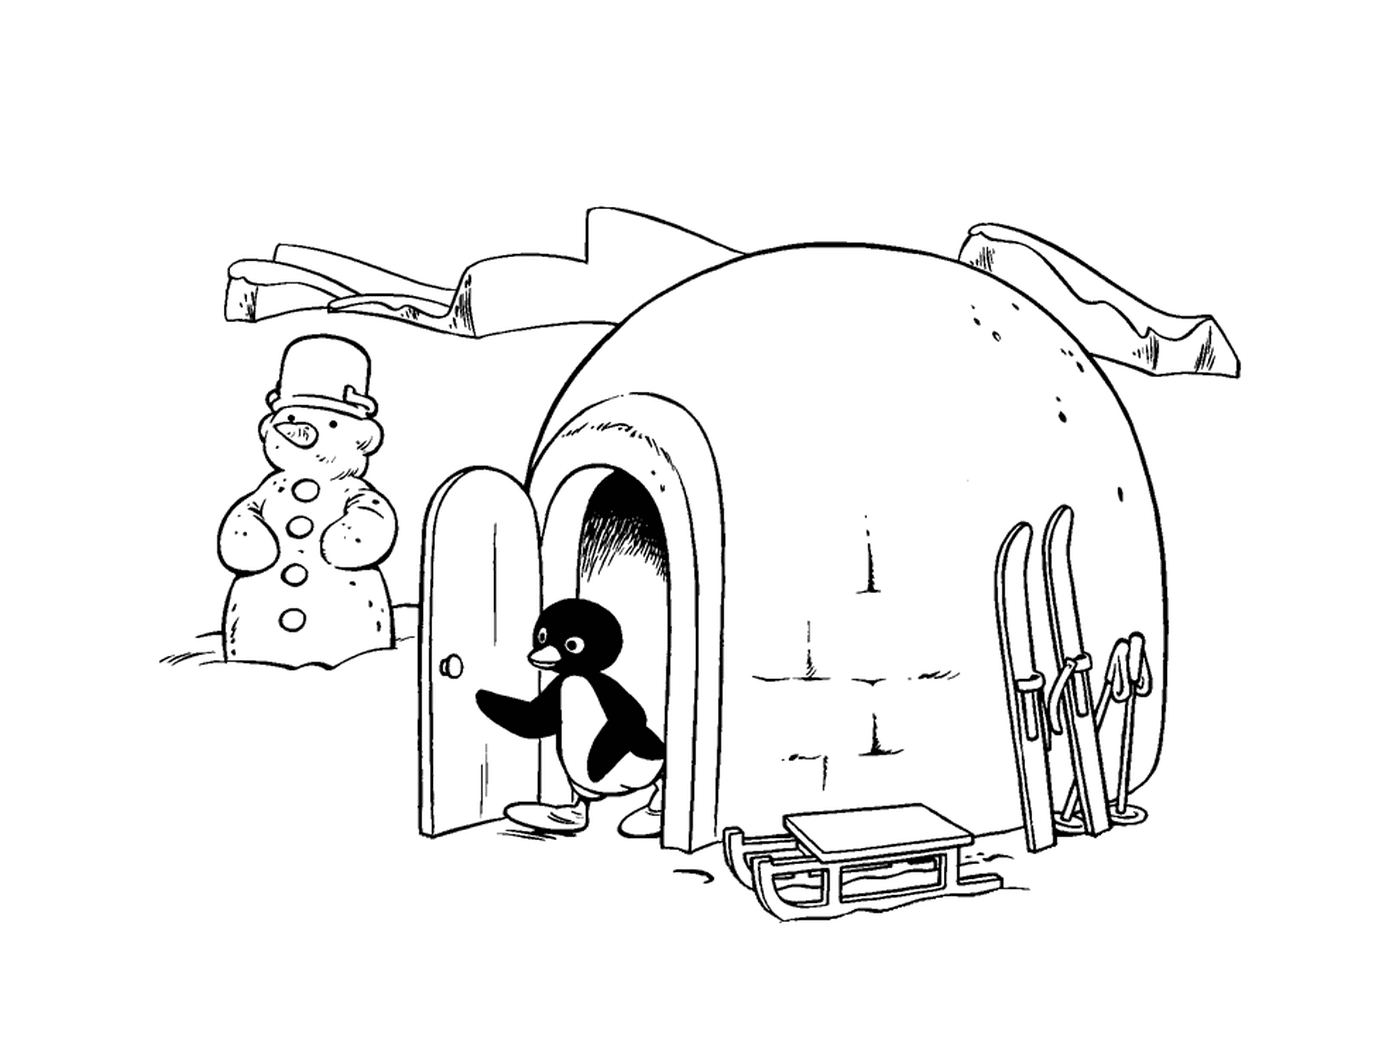  Pingu coming out of his igloo 